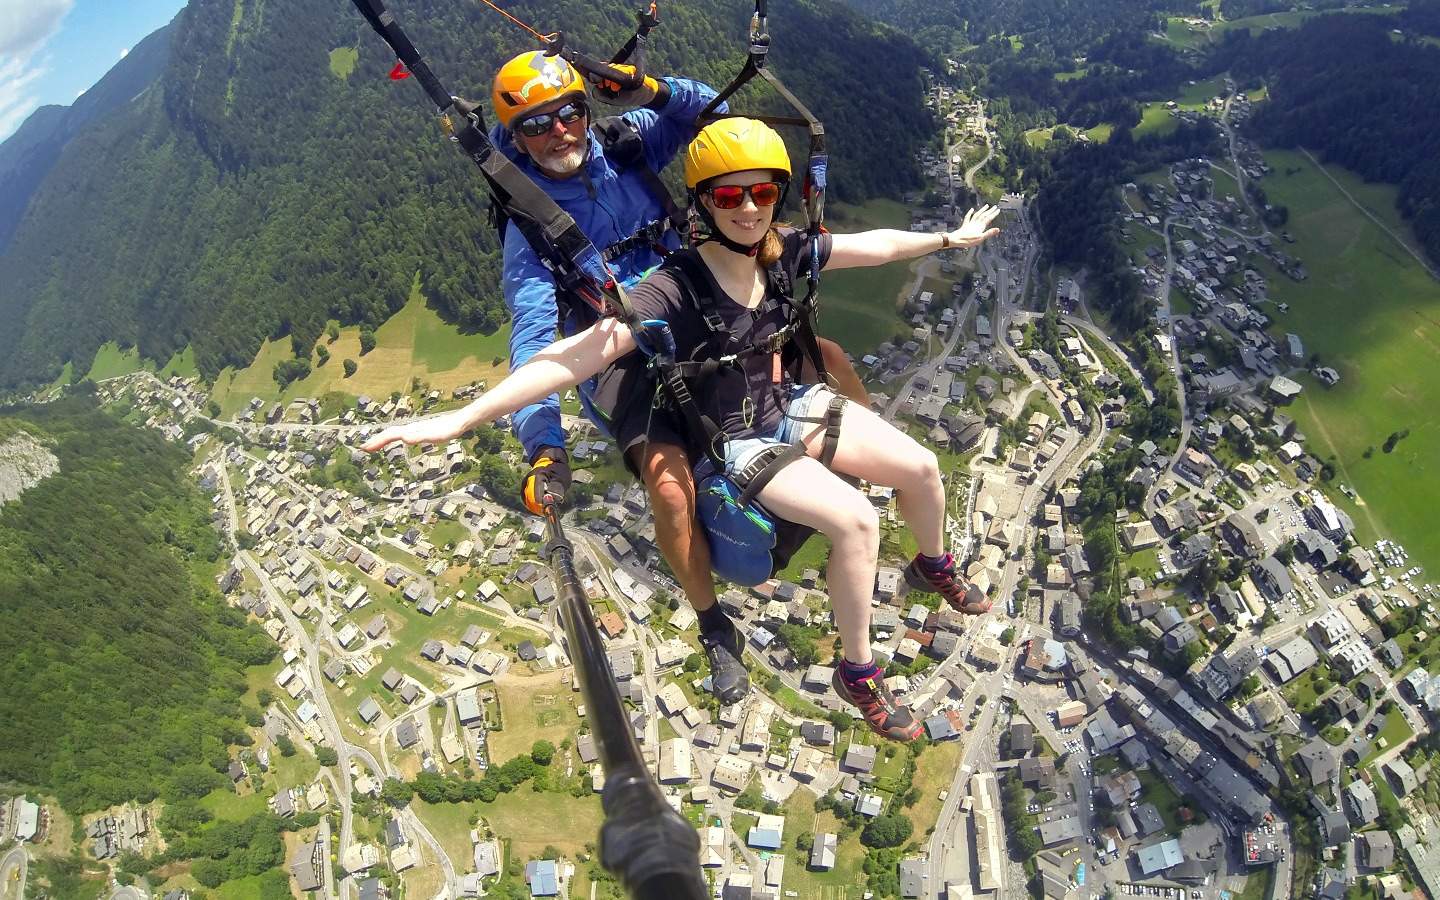 Paragliding/parapenting in Morzine in the summer